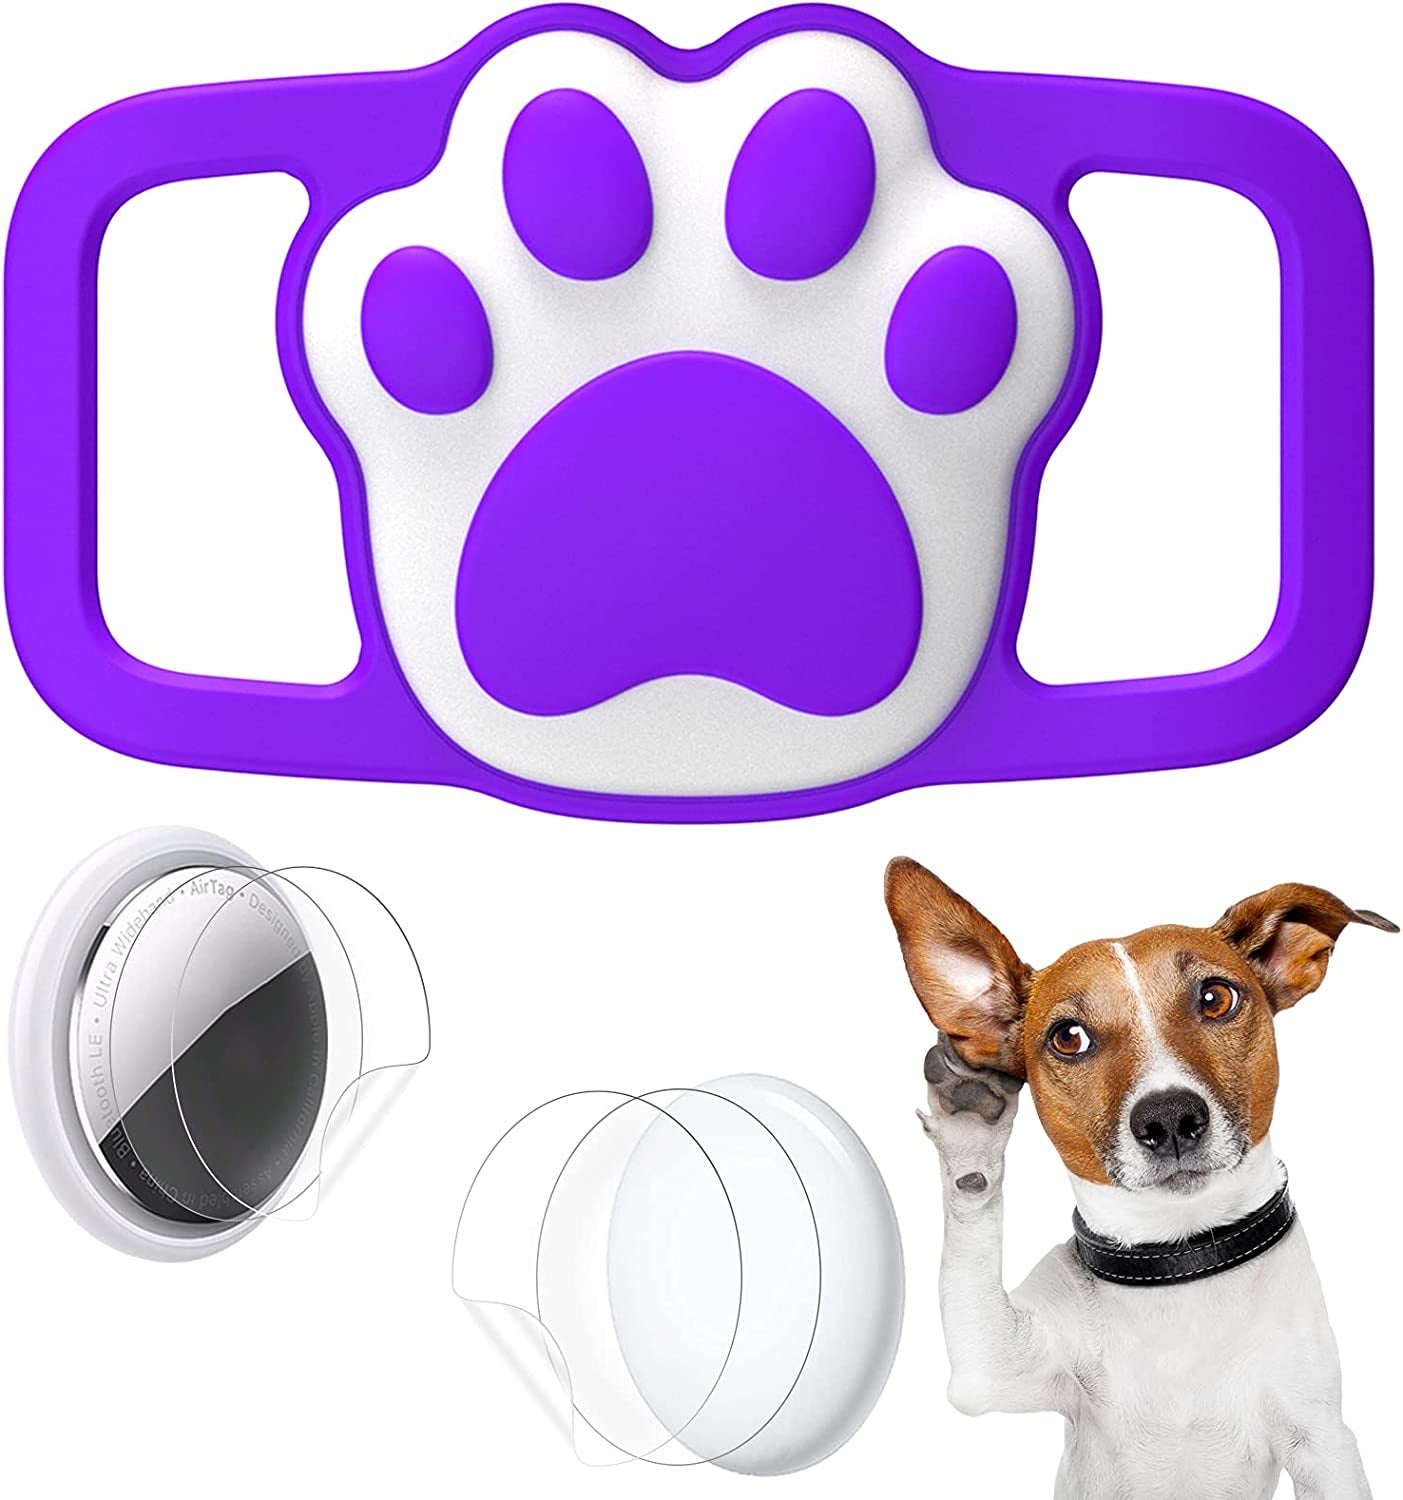 Protective Case Compatible for Apple Airtags for Dog Cat Collar Pet Loop Holder, Airtag Holder Accessories with Screen Protectors, Air Tag Silicone Cover for Pet Collar Electronics > GPS Accessories > GPS Cases Wustentre Purple  